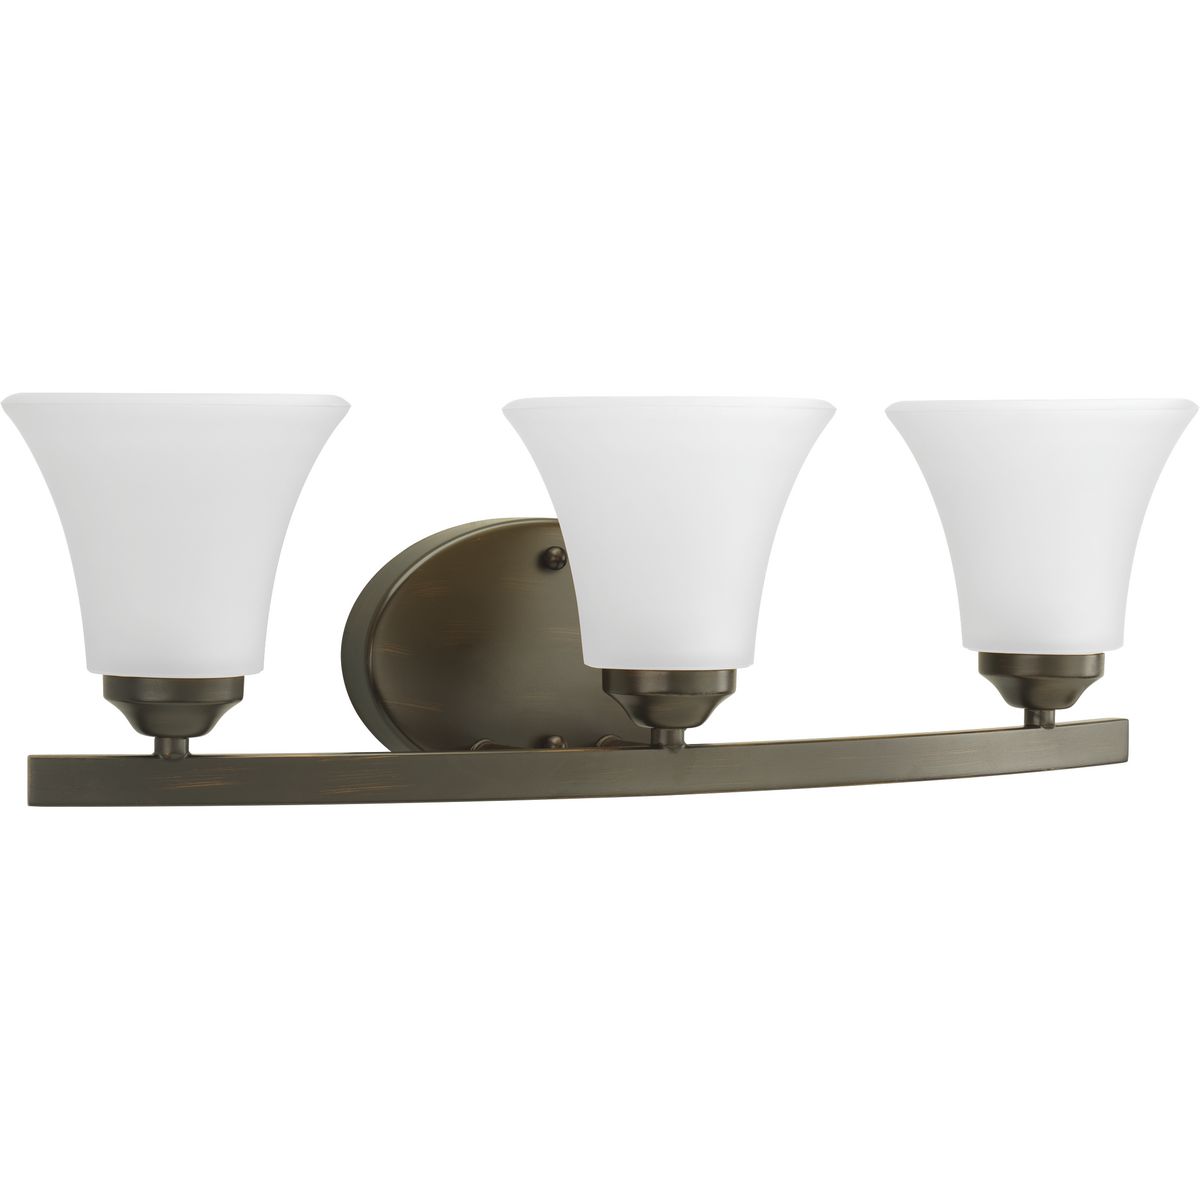 Adorn features a sweeping arced frame that supports elegant, tapered glass shades. This three-light bath fixture is finished in Antique Bronze with etched glass. It can be installed with shades facing either up or downwards. Adorn coordinates great with the Joy and Bravo families.